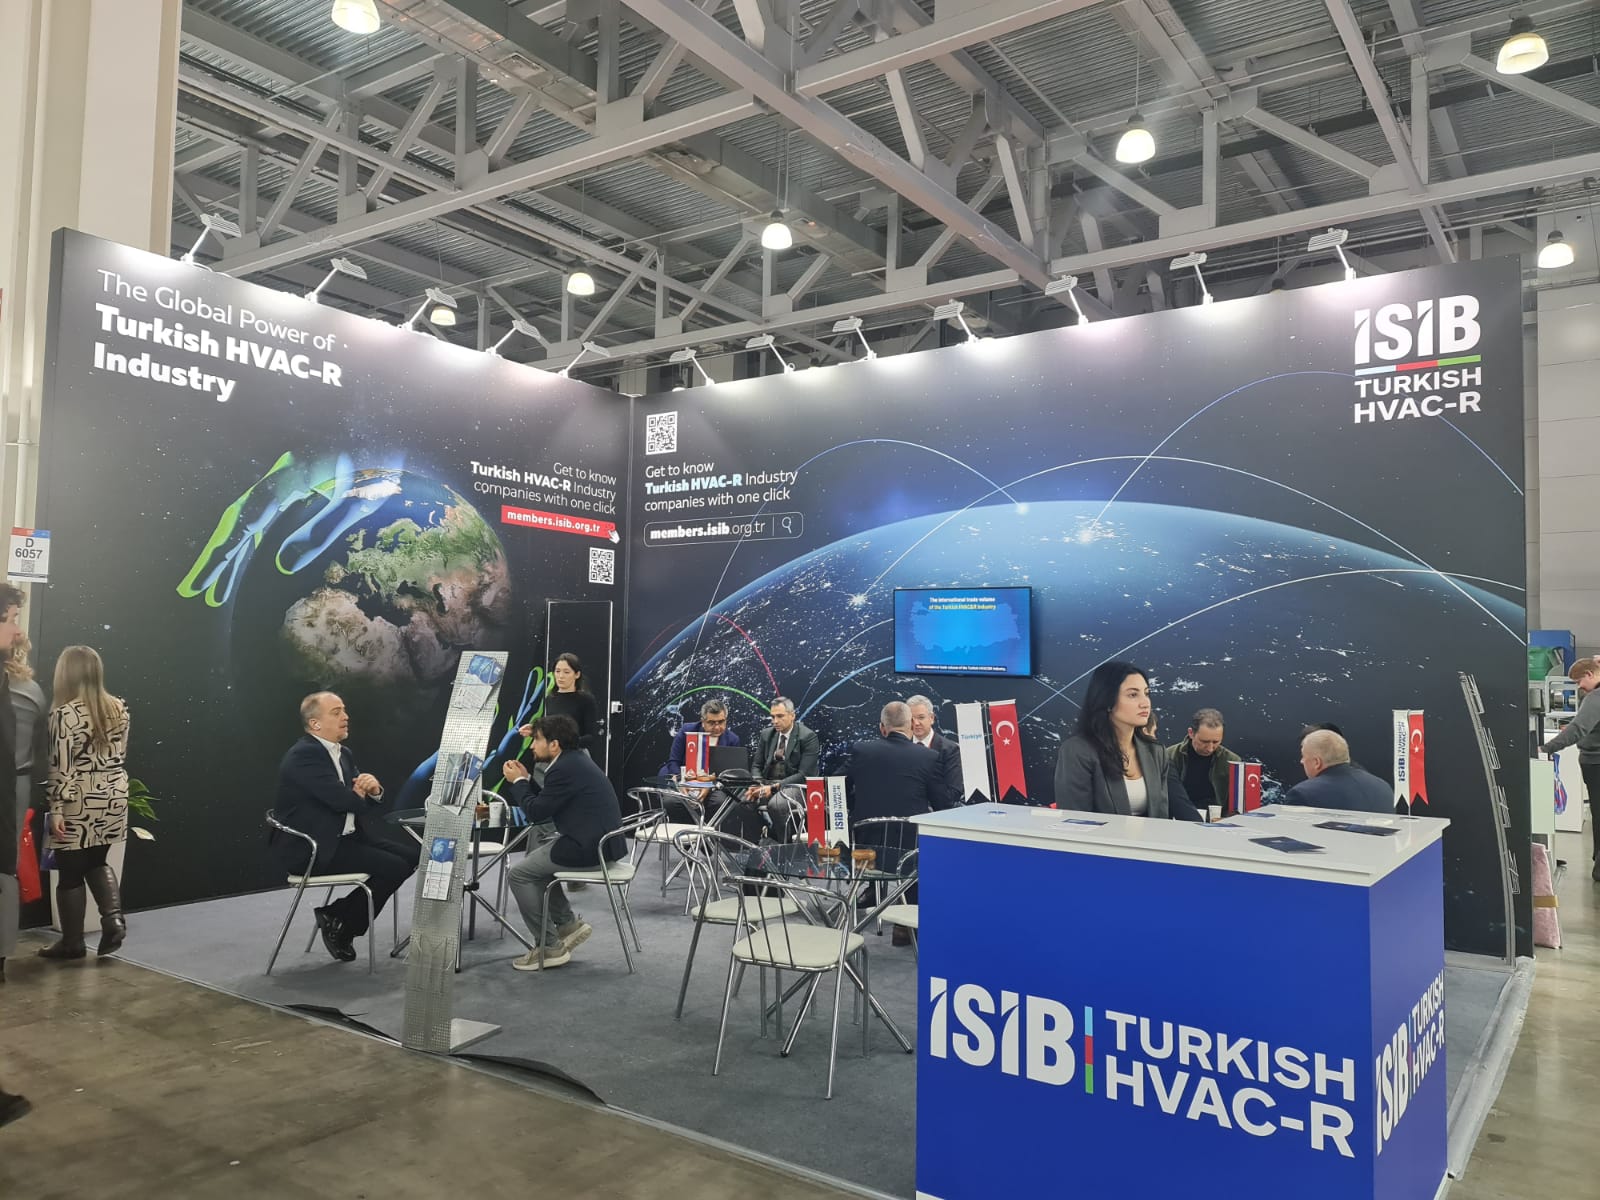 Turkish HVAC-R Industry Participates Significantly in Exhibitions in Russia - 6